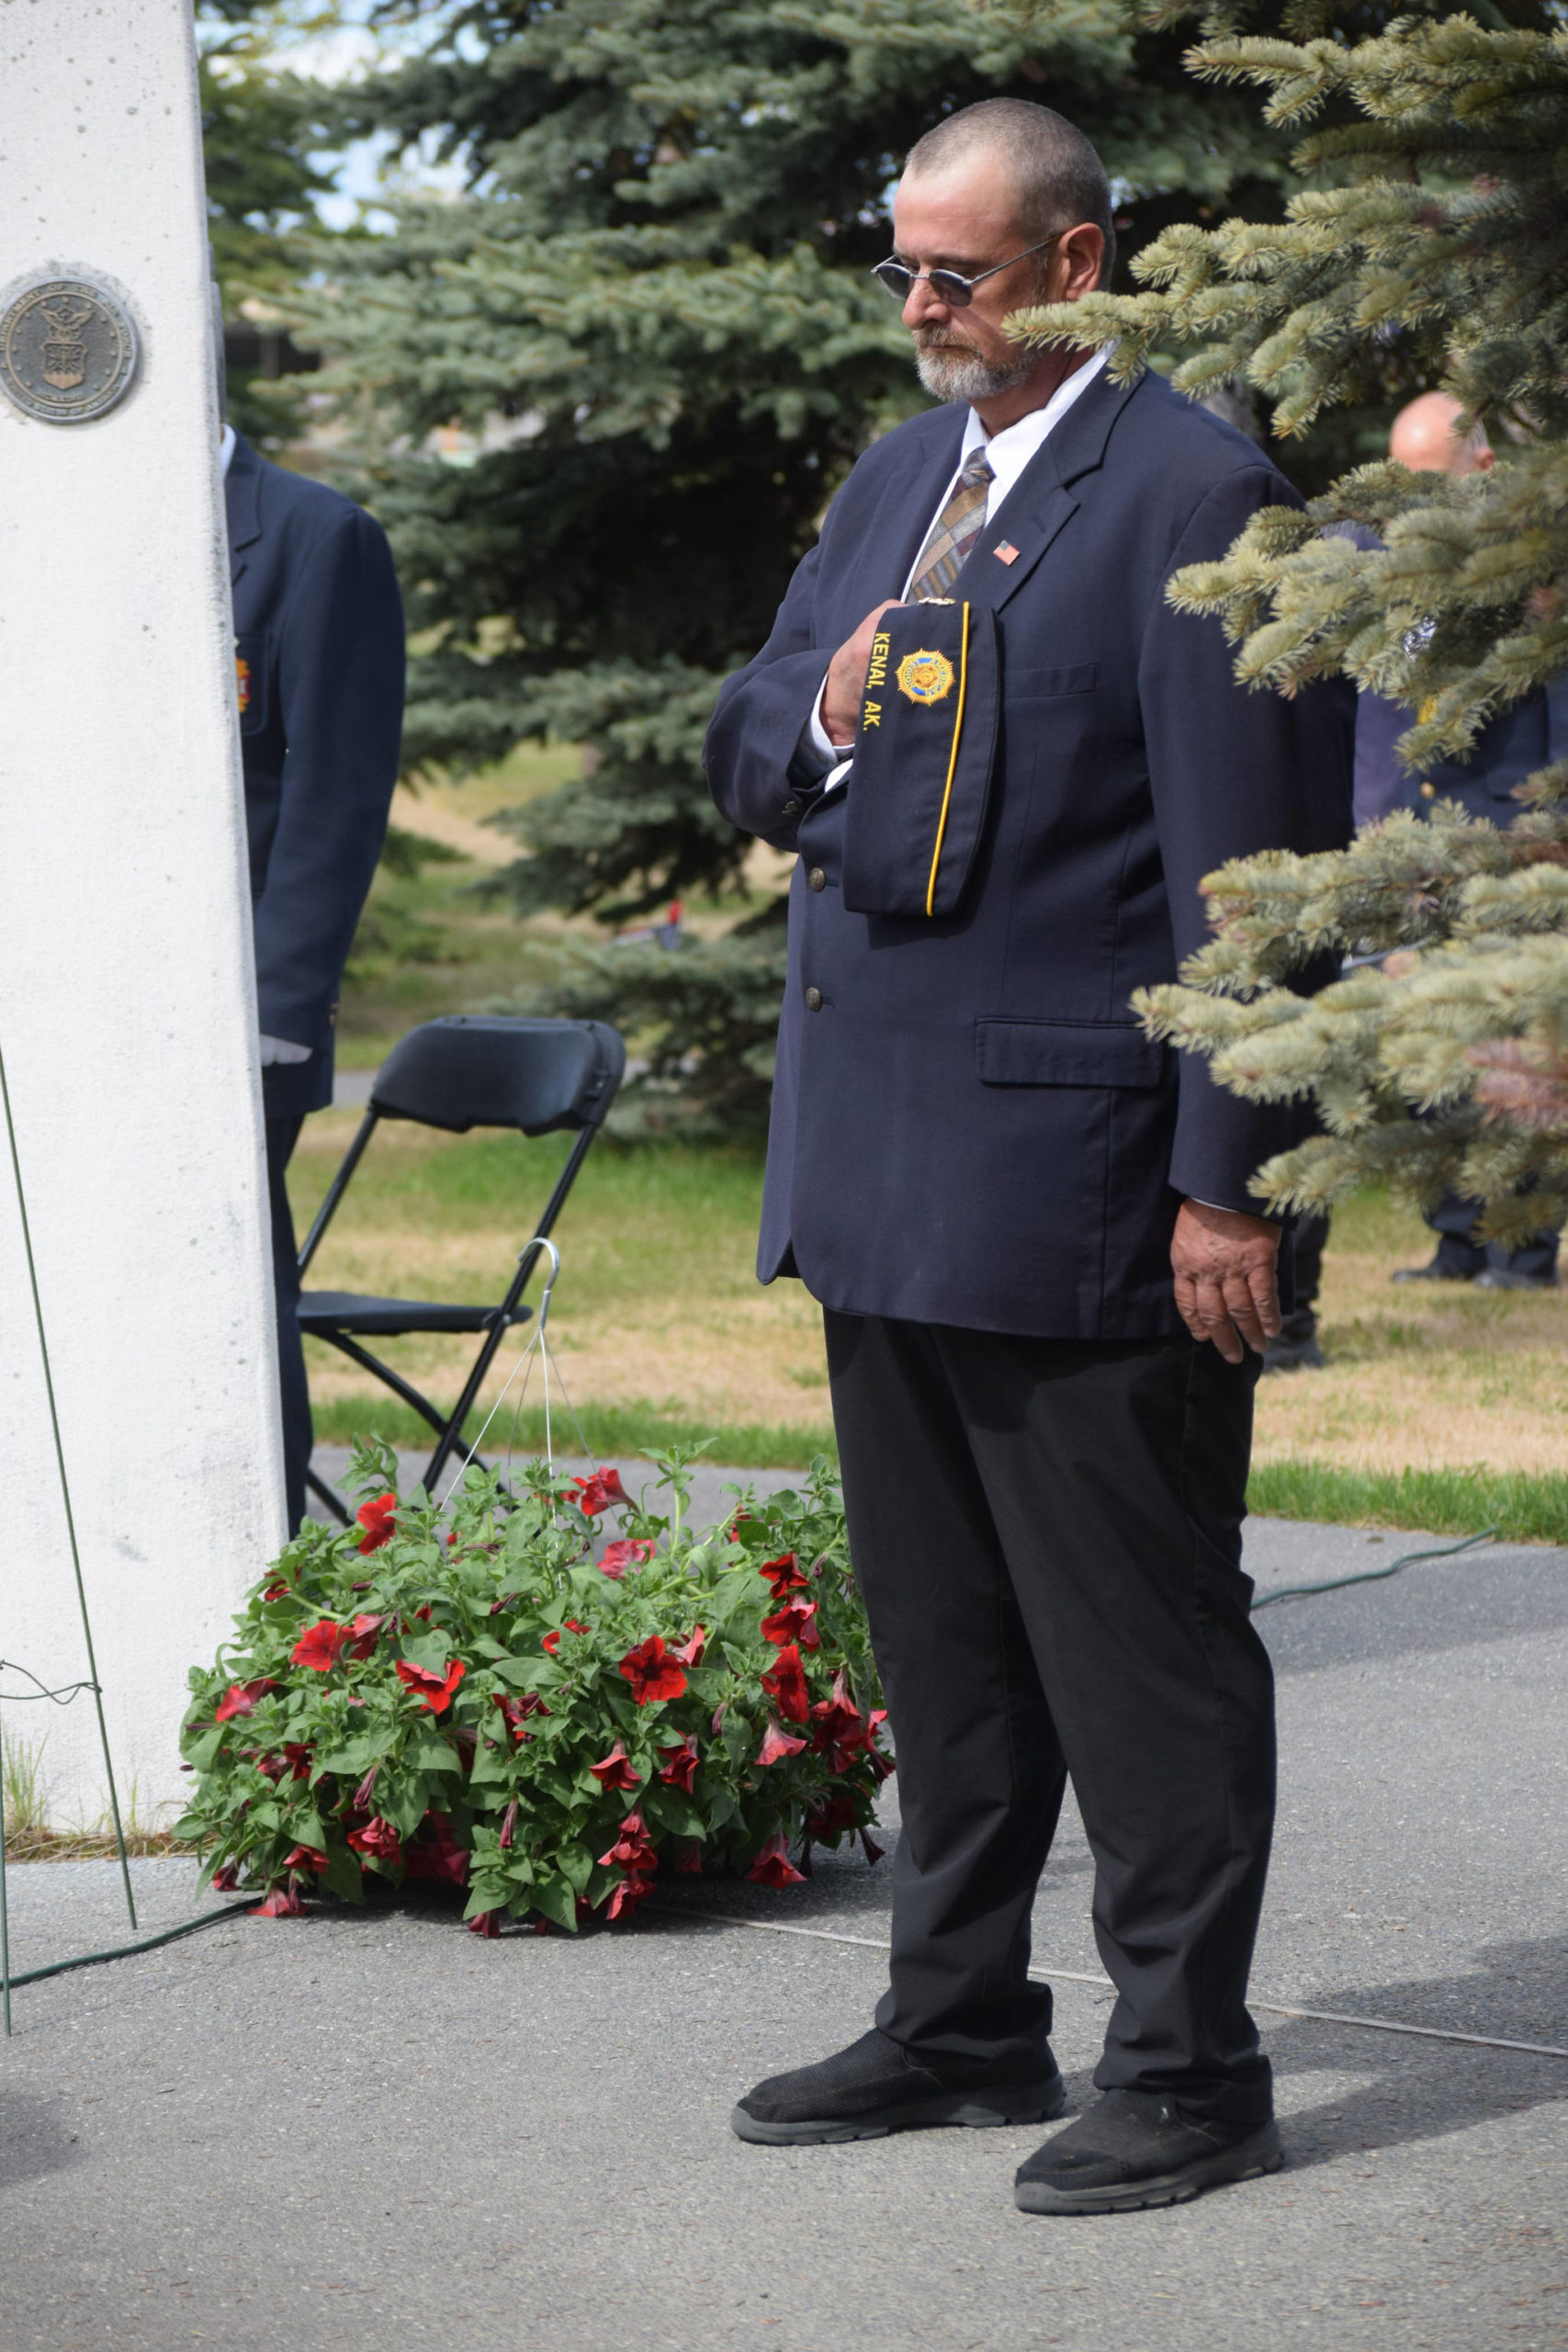 Commander David Segura bows his head during the opening invocation of the Memorial Day ceremony at Leif Hansen Memorial Park in Kenai, Alaska, on Monday, May 31, 2021. (Camille Botello/Peninsula Clarion)